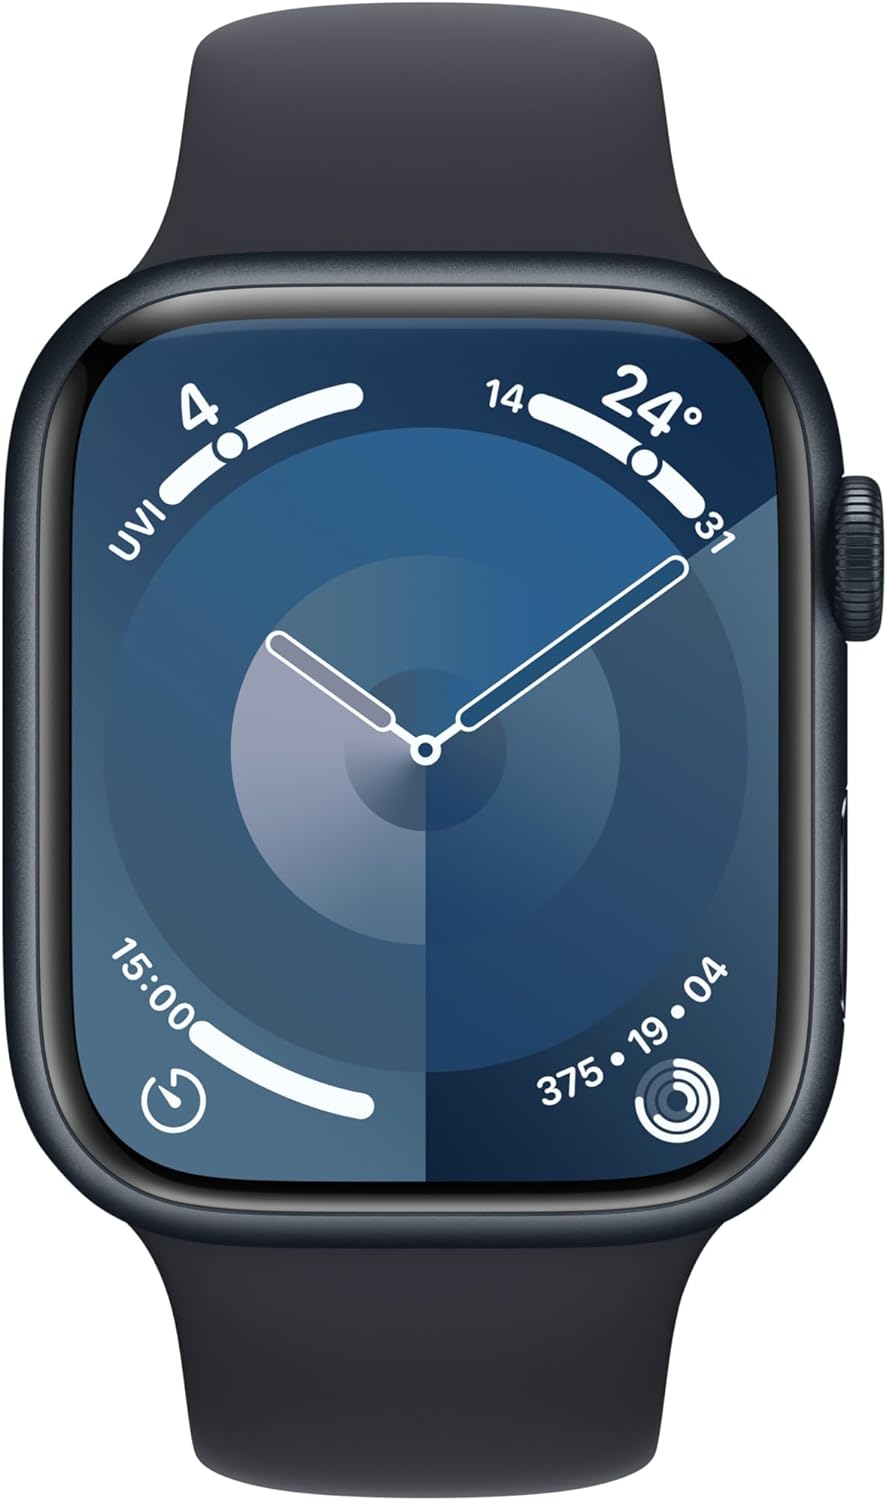 The image displays an Apple Watch Series 9 with a digital watch face. The watch face shows the time with analog-style hands and includes several other pieces of information around the perimeter, such as UV index, temperature, and what appears to be a timer set for 15:00. There are also indicators for activity tracking, noted by what seems to be a 'move' ring, and a small icon at the bottom right that may represent connectivity or audio functions. The overall design of the watch suggests a sleek, modern aesthetic with a focus on displaying various metrics that could be important for daily use or fitness activities.